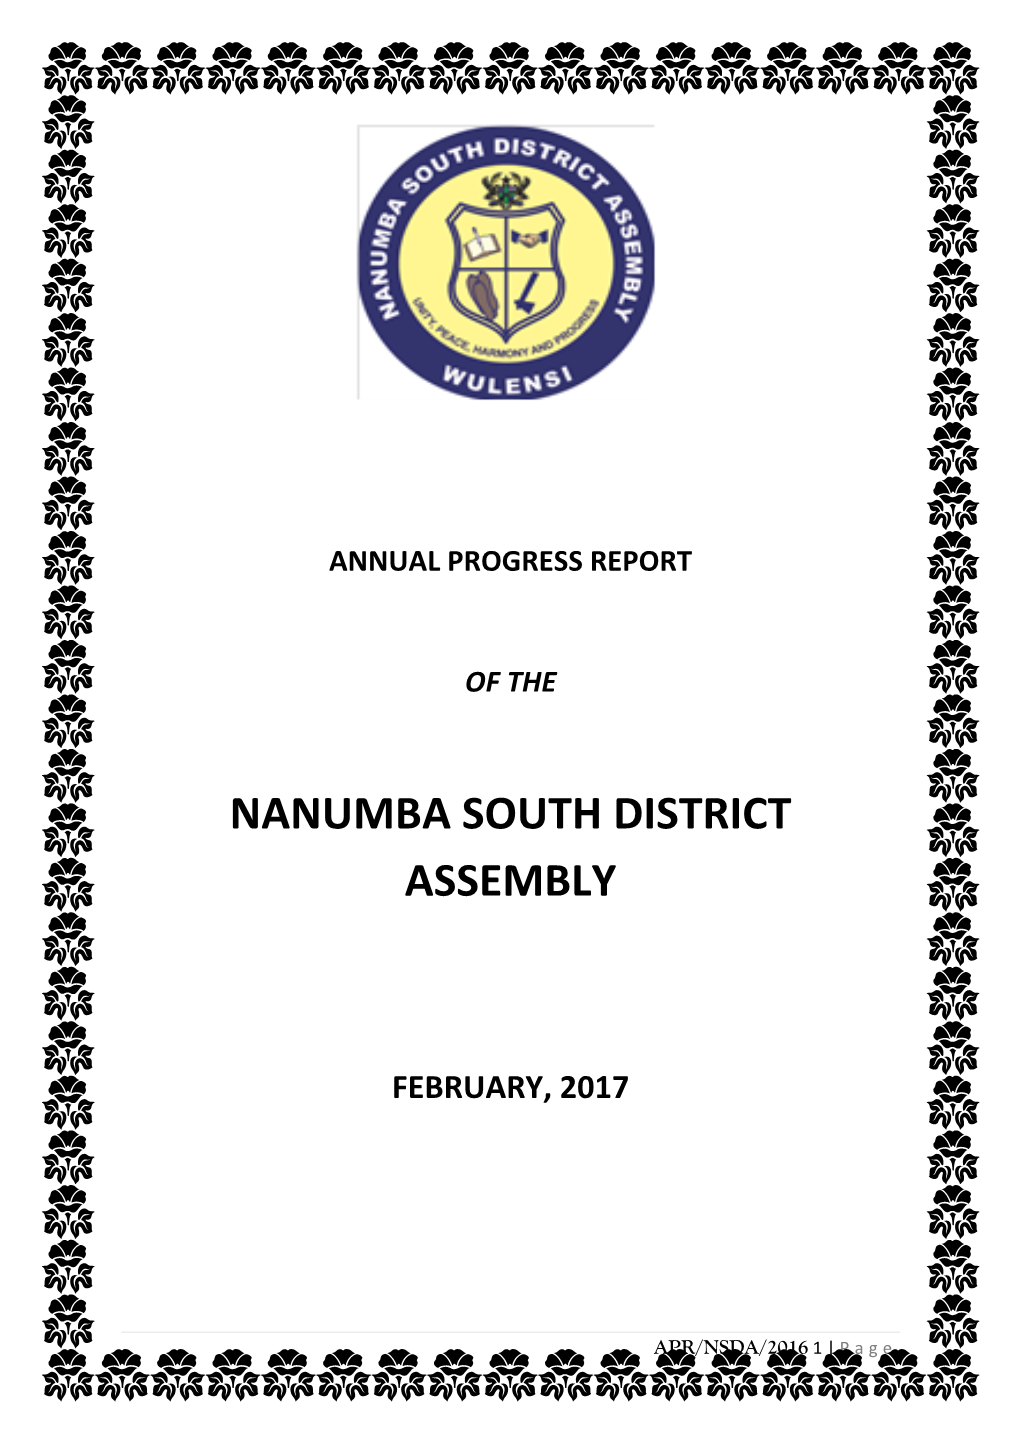 Nanumba South District Assembly